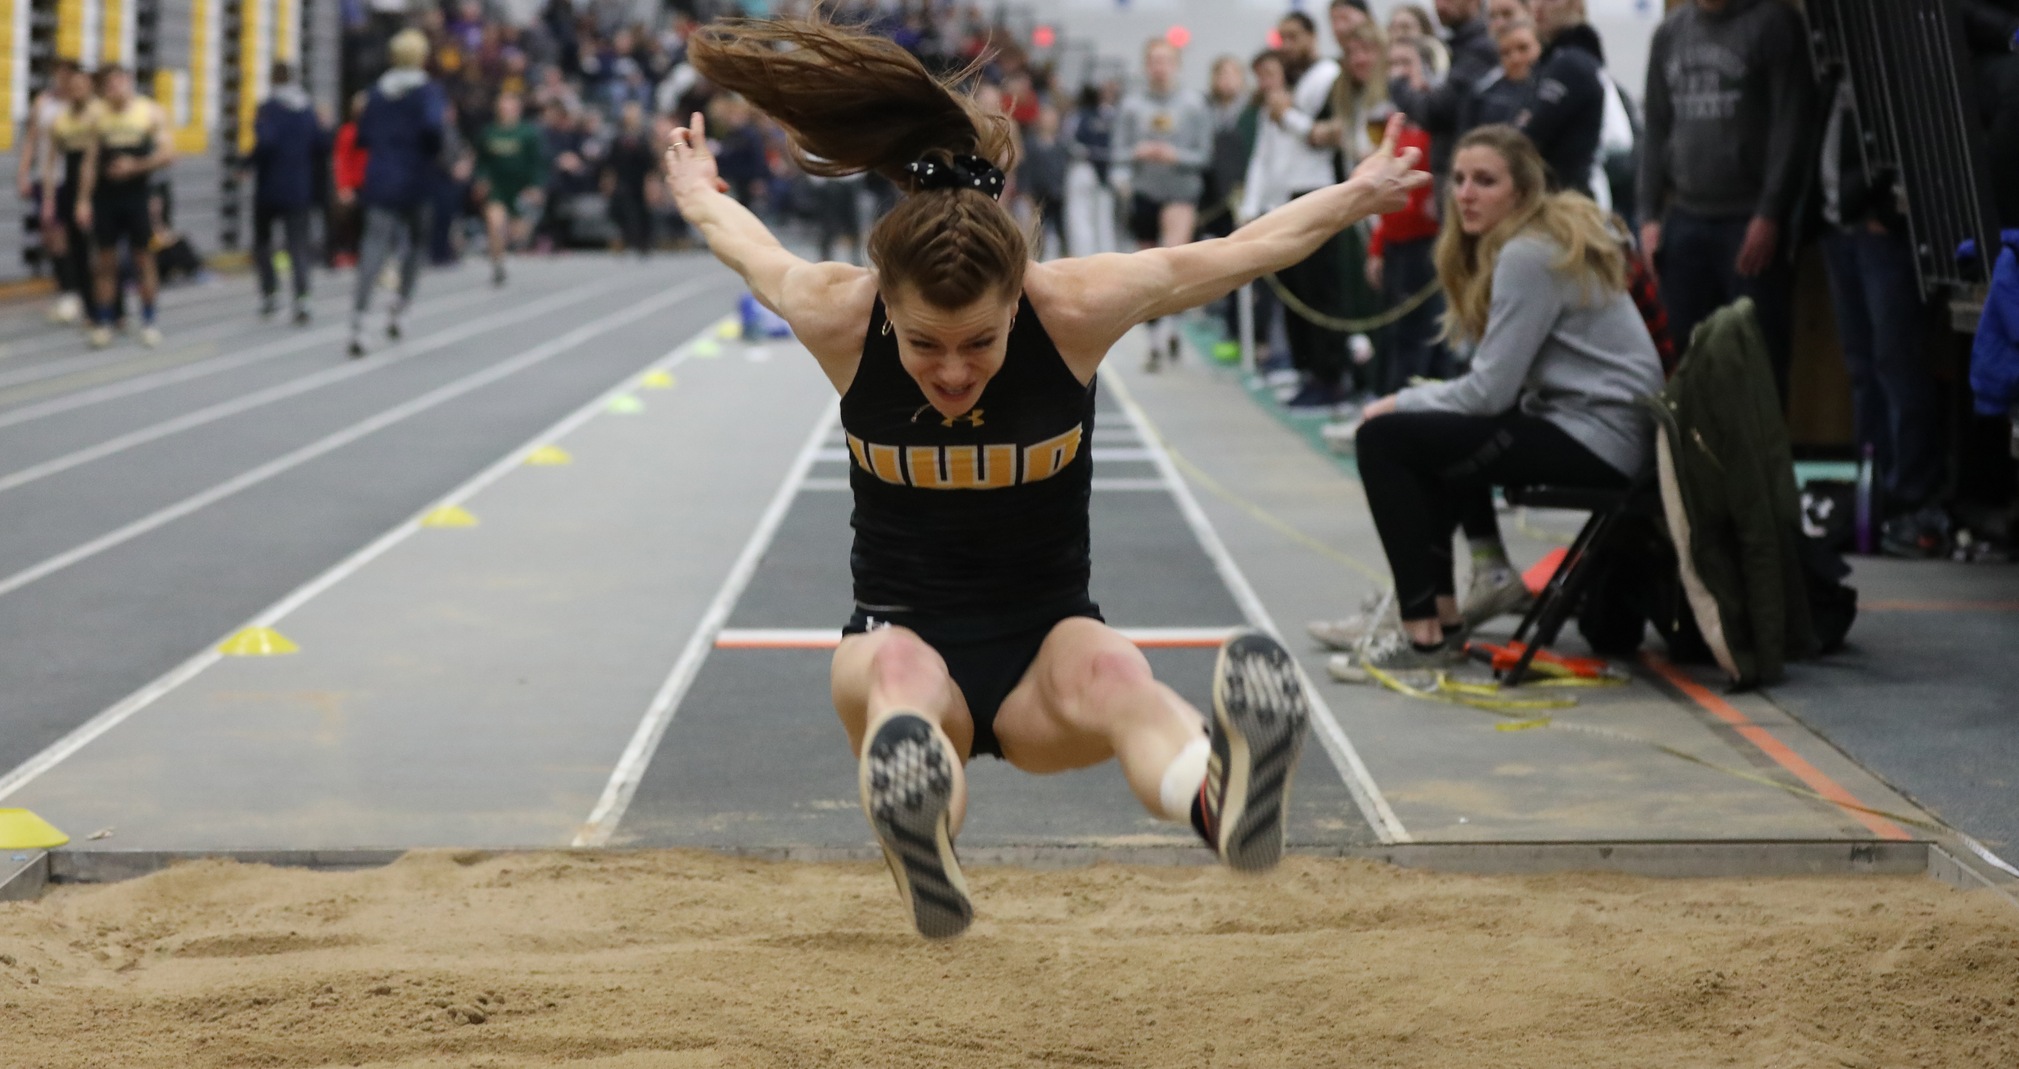 Lauren Wrensch broke the UW-Oshkosh record in the long jump for the second time this season.